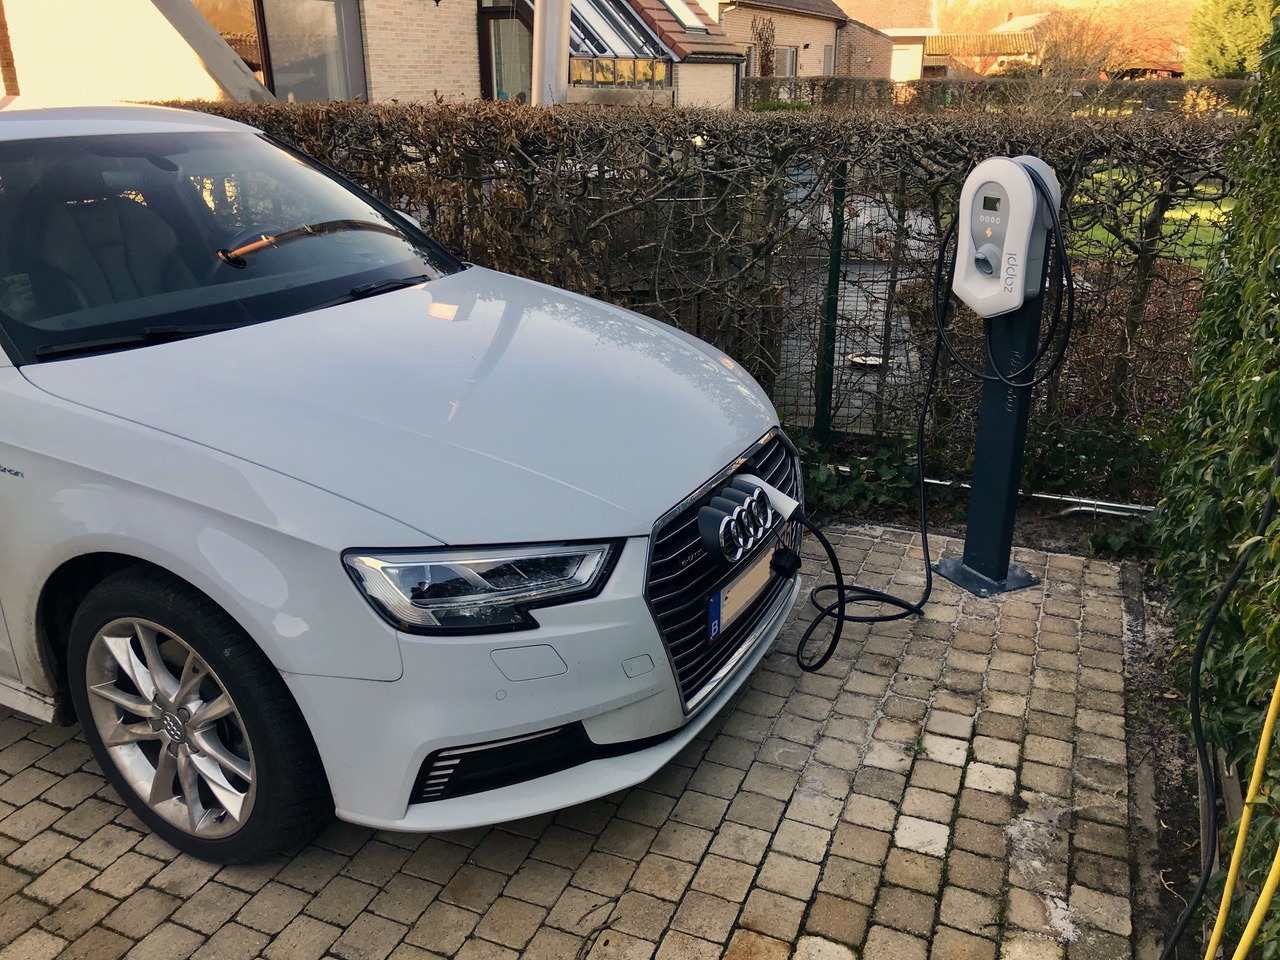 Electric car charging at home with smart EV charger zappi